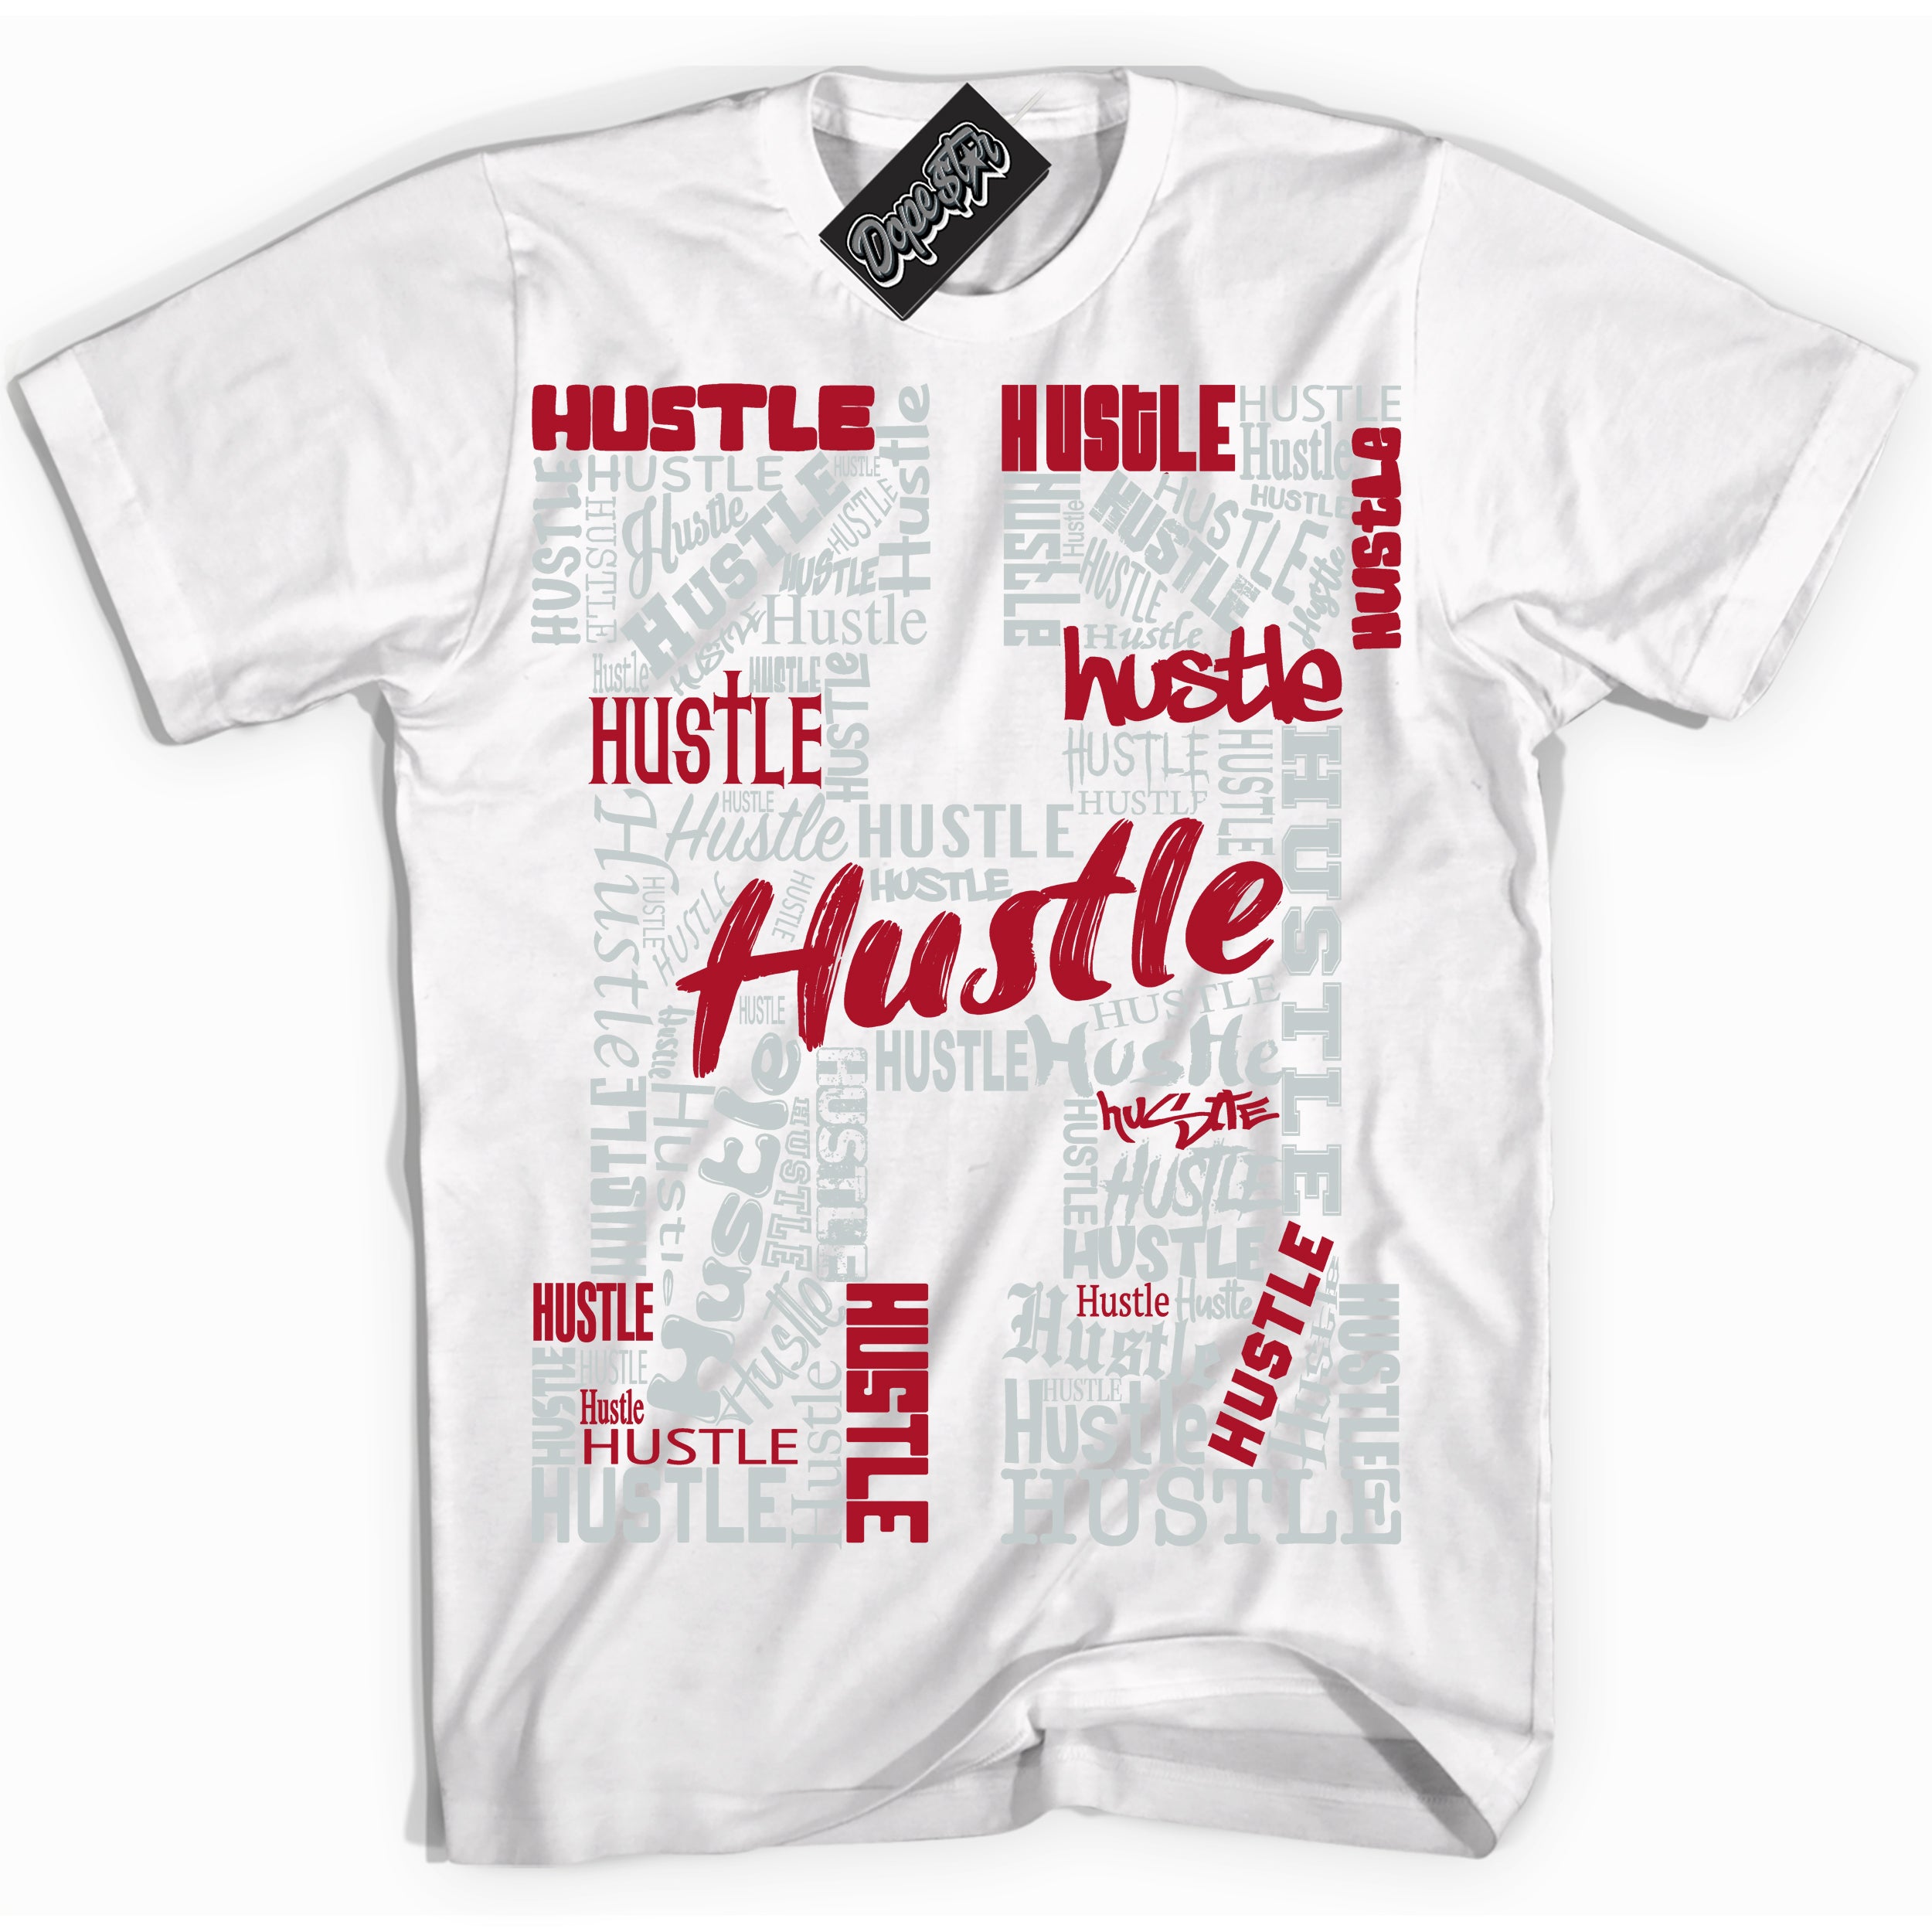 Cool White Shirt with “ Hustle H” design that perfectly matches Reverse Ultraman Sneakers.